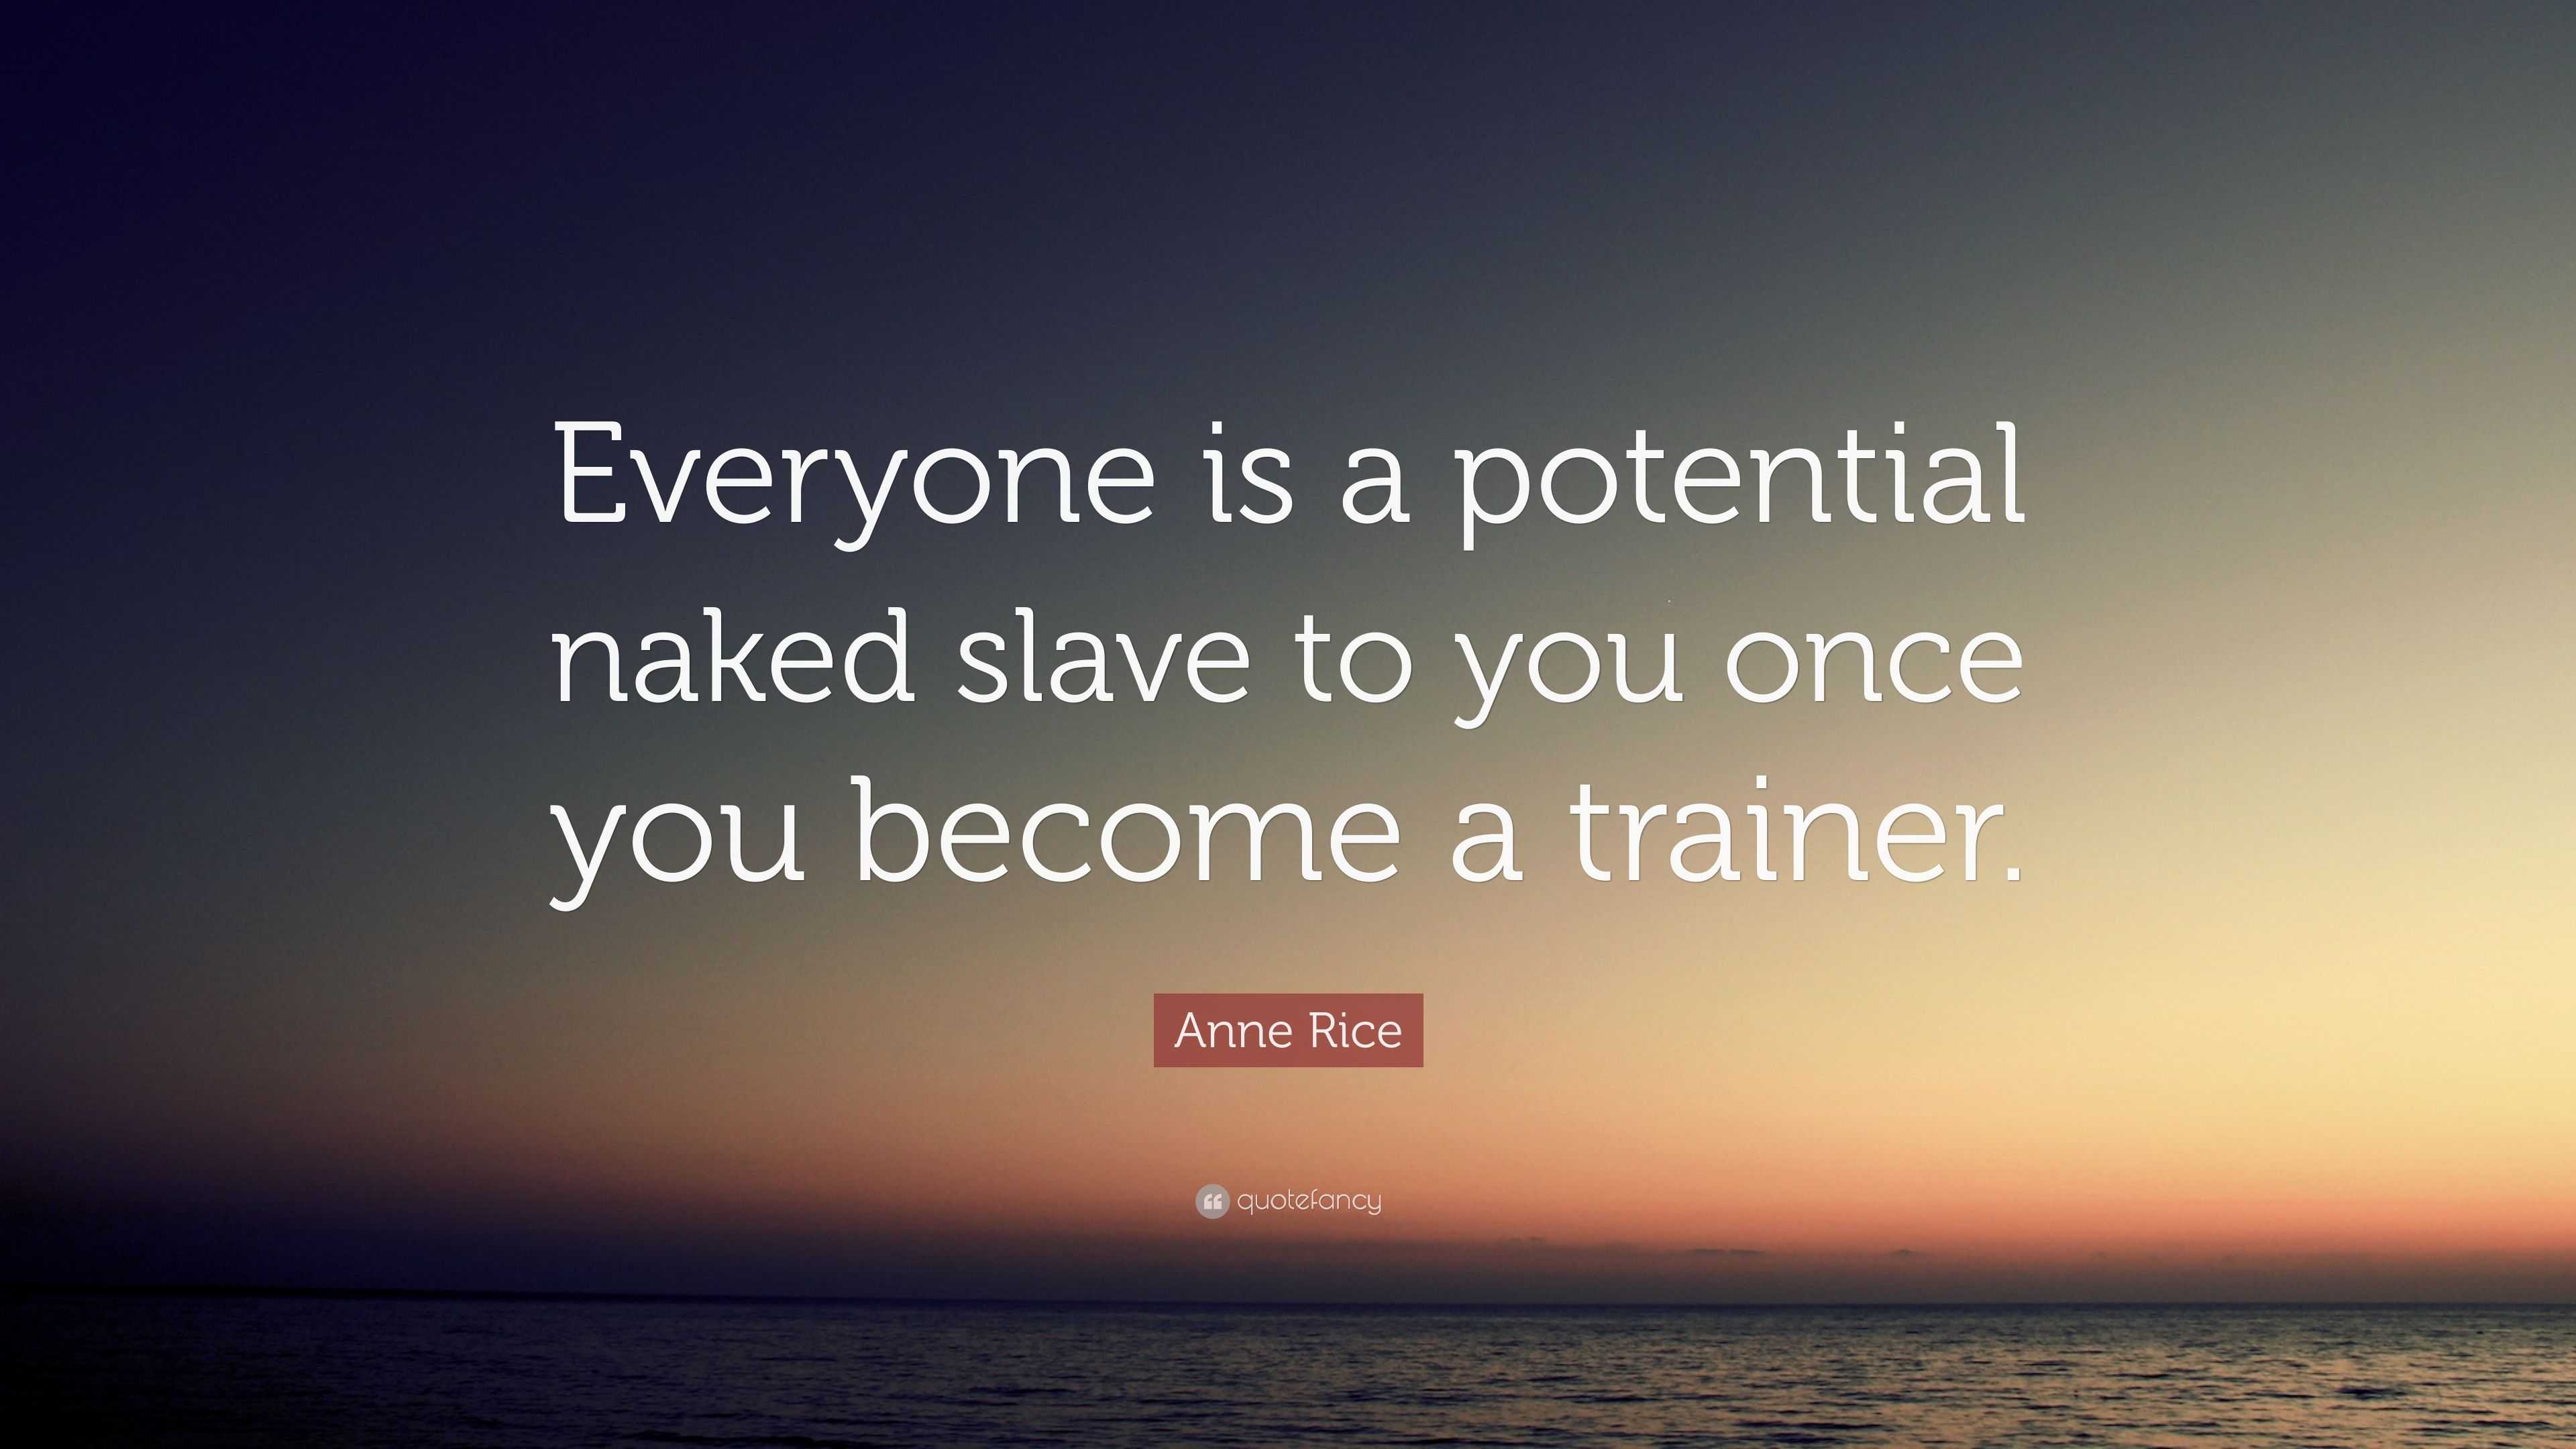 Anne Rice Quote Everyone Is A Potential Naked Slave To You Once You Become A Trainer